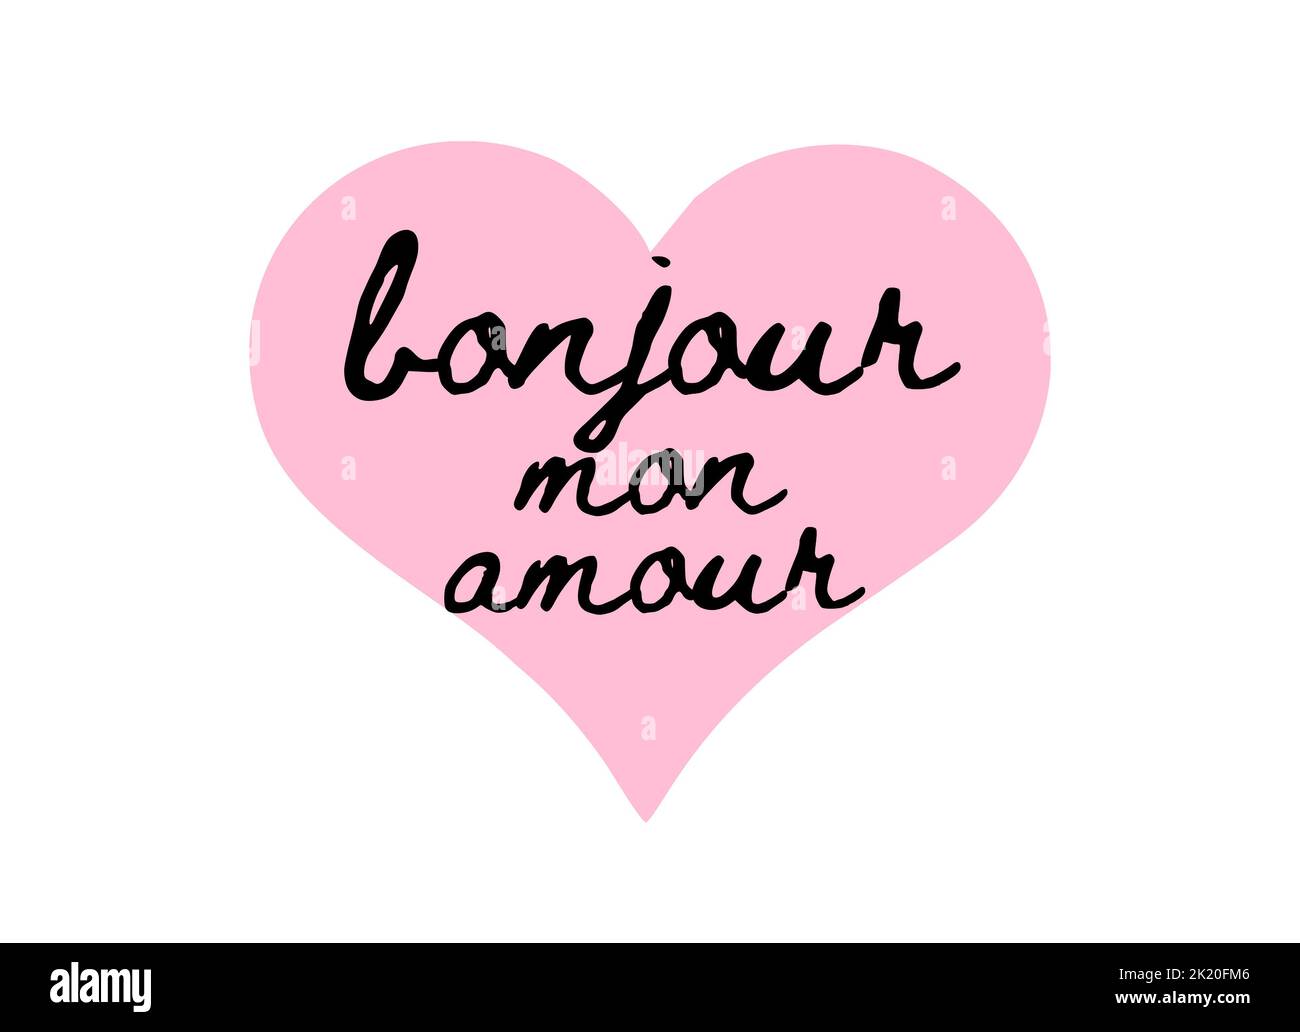 Bonjour amour Cut Out Stock Images & Pictures - Alamy